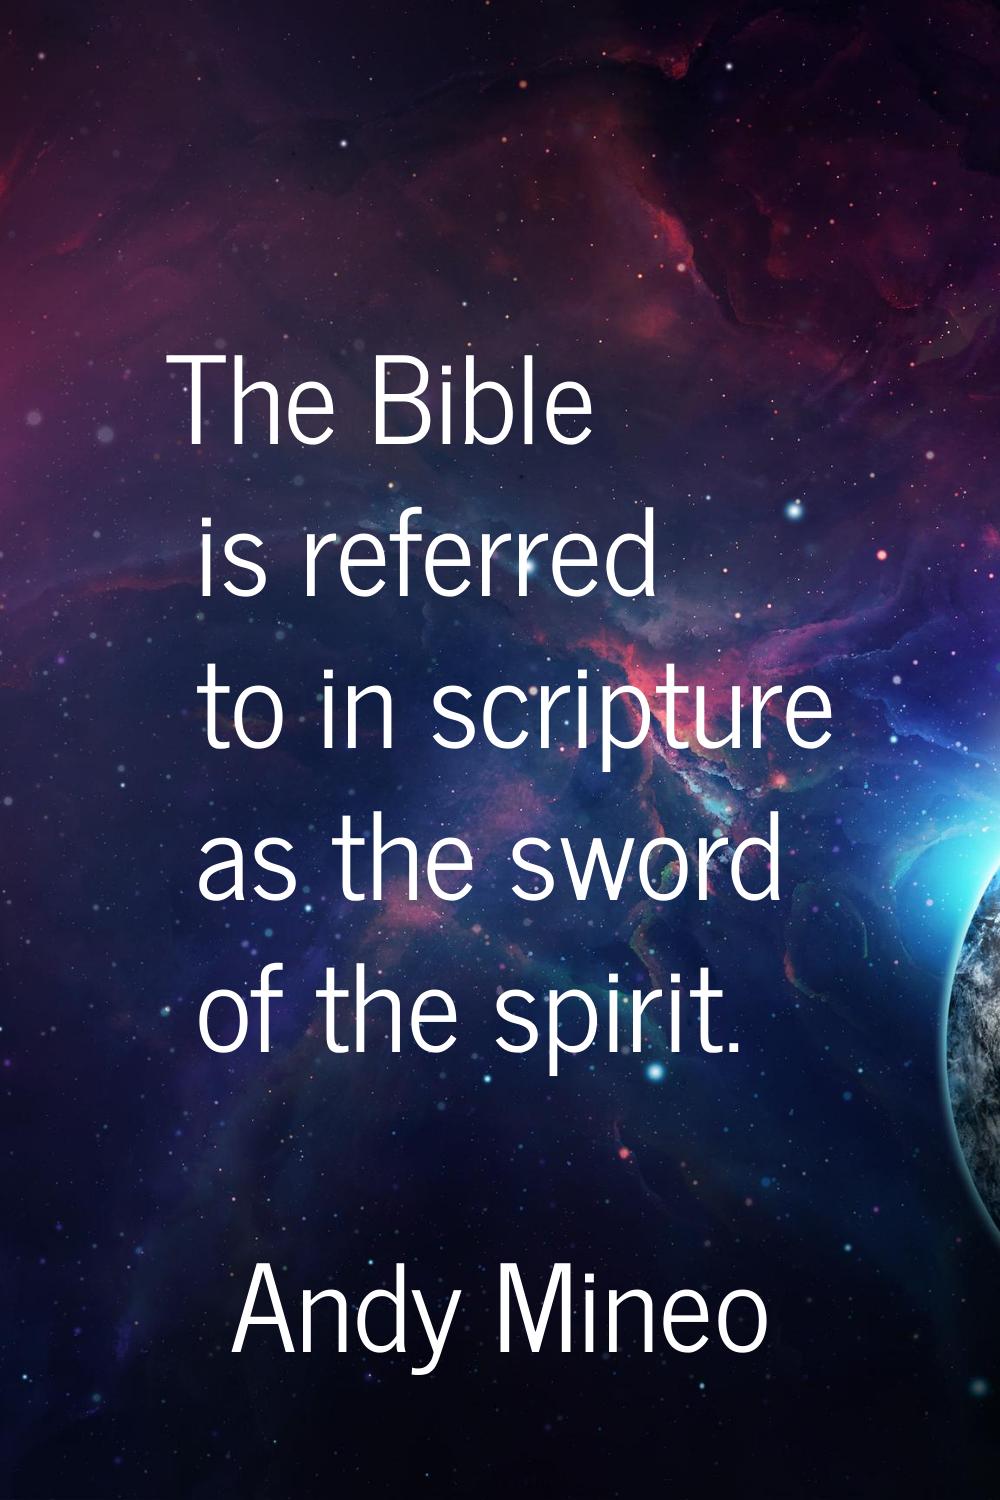 The Bible is referred to in scripture as the sword of the spirit.